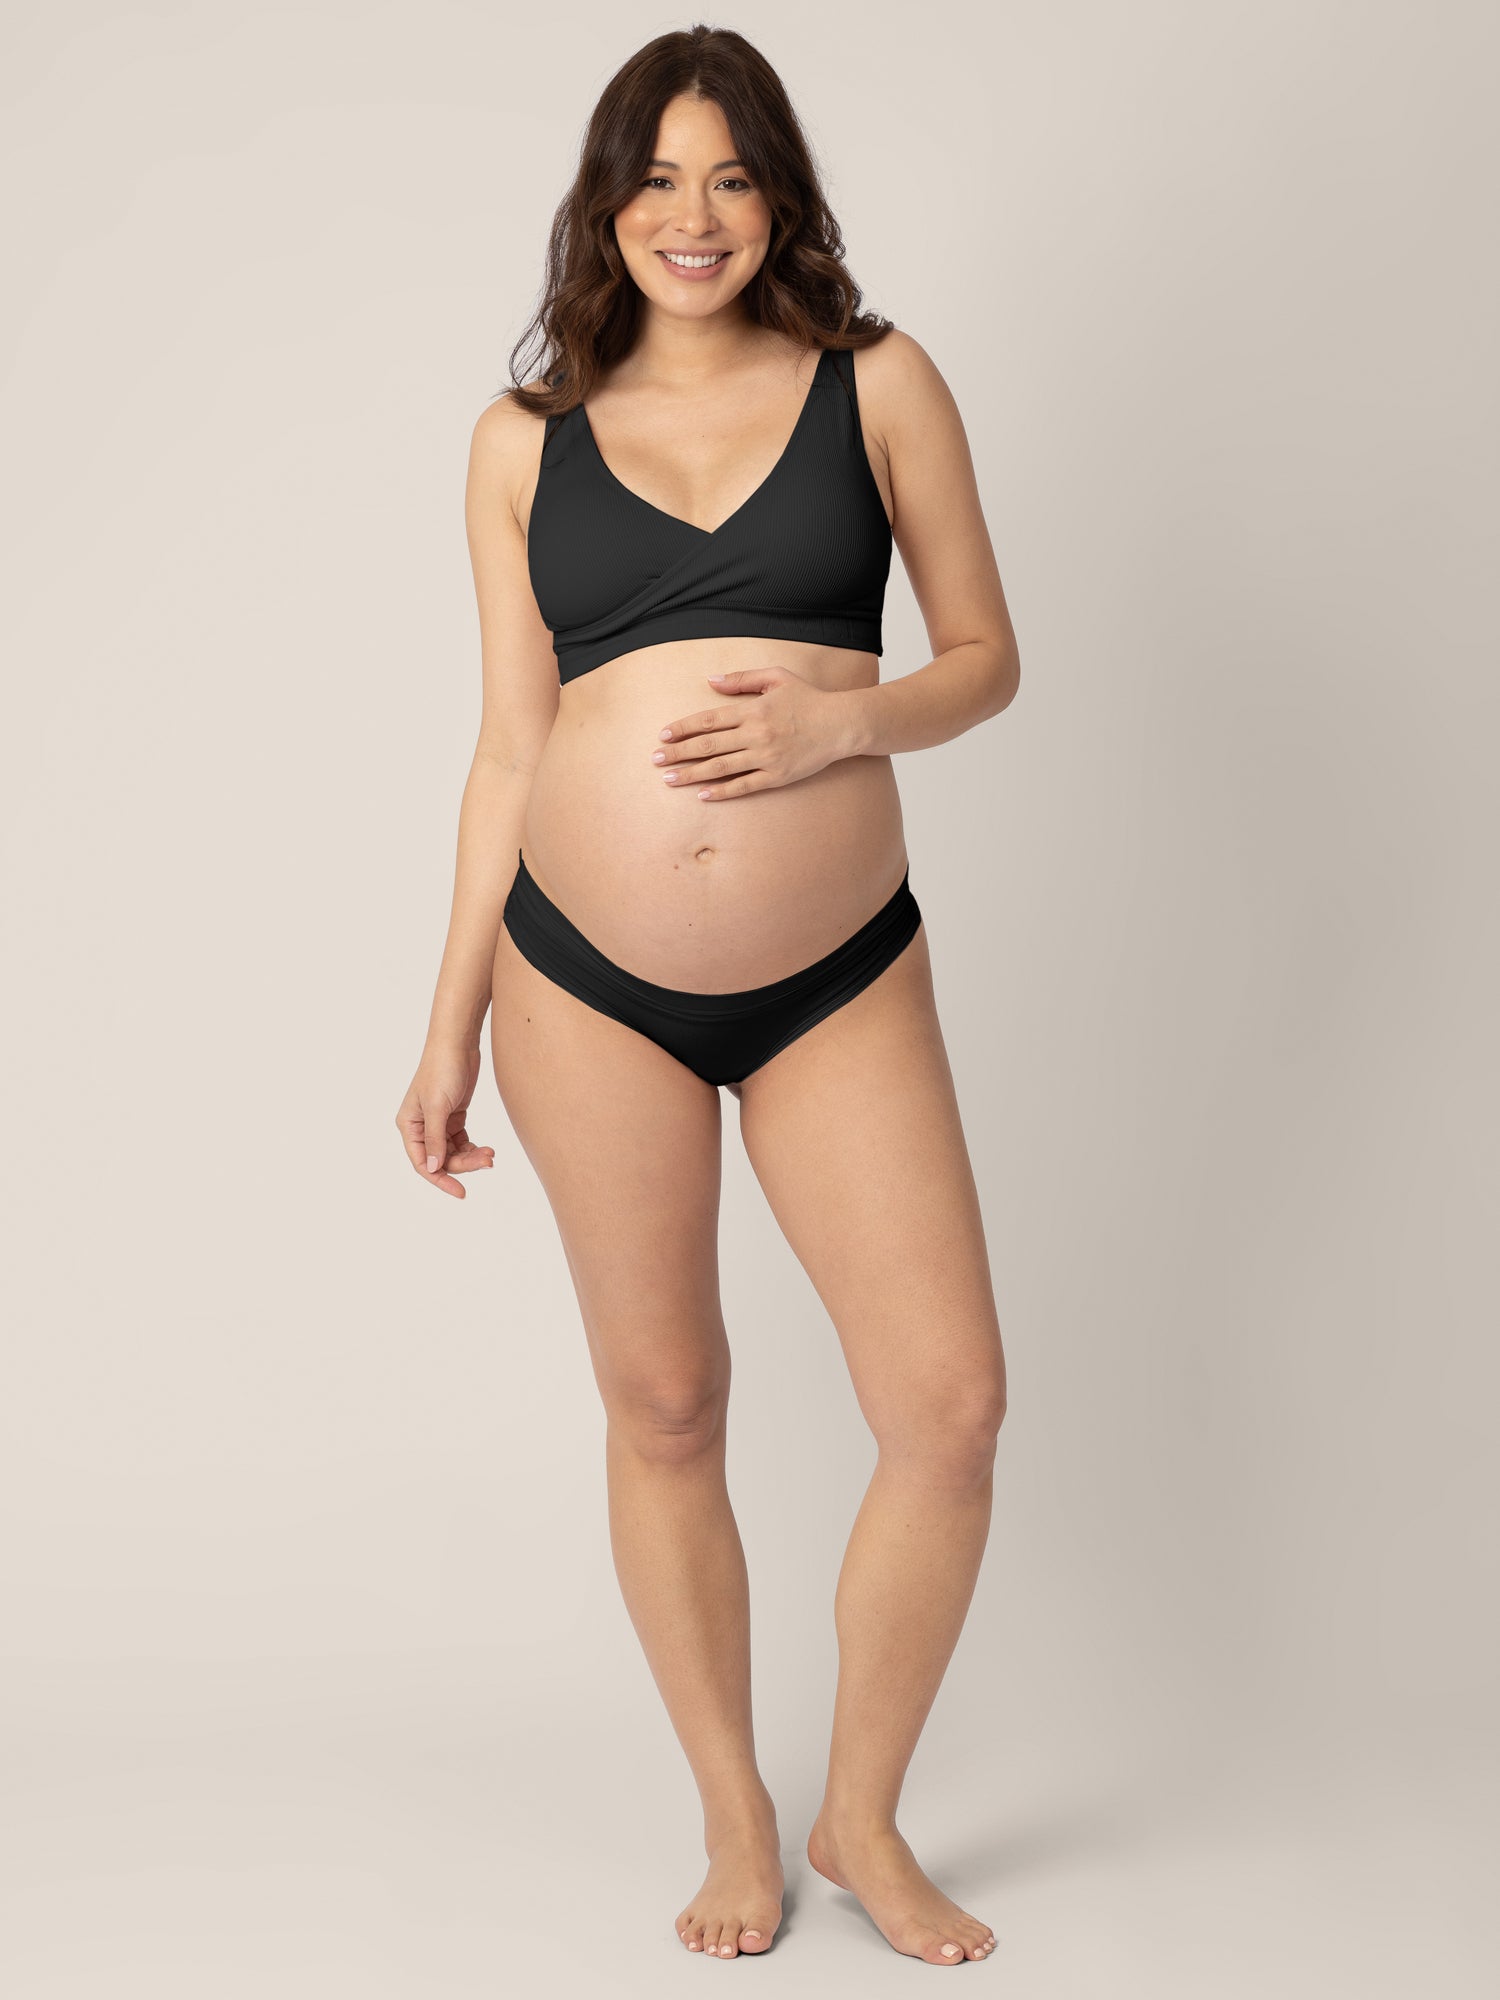 Pregnant model wearing the Grow with Me™ Maternity & Postpartum Thong in Black holding her belly bump. 